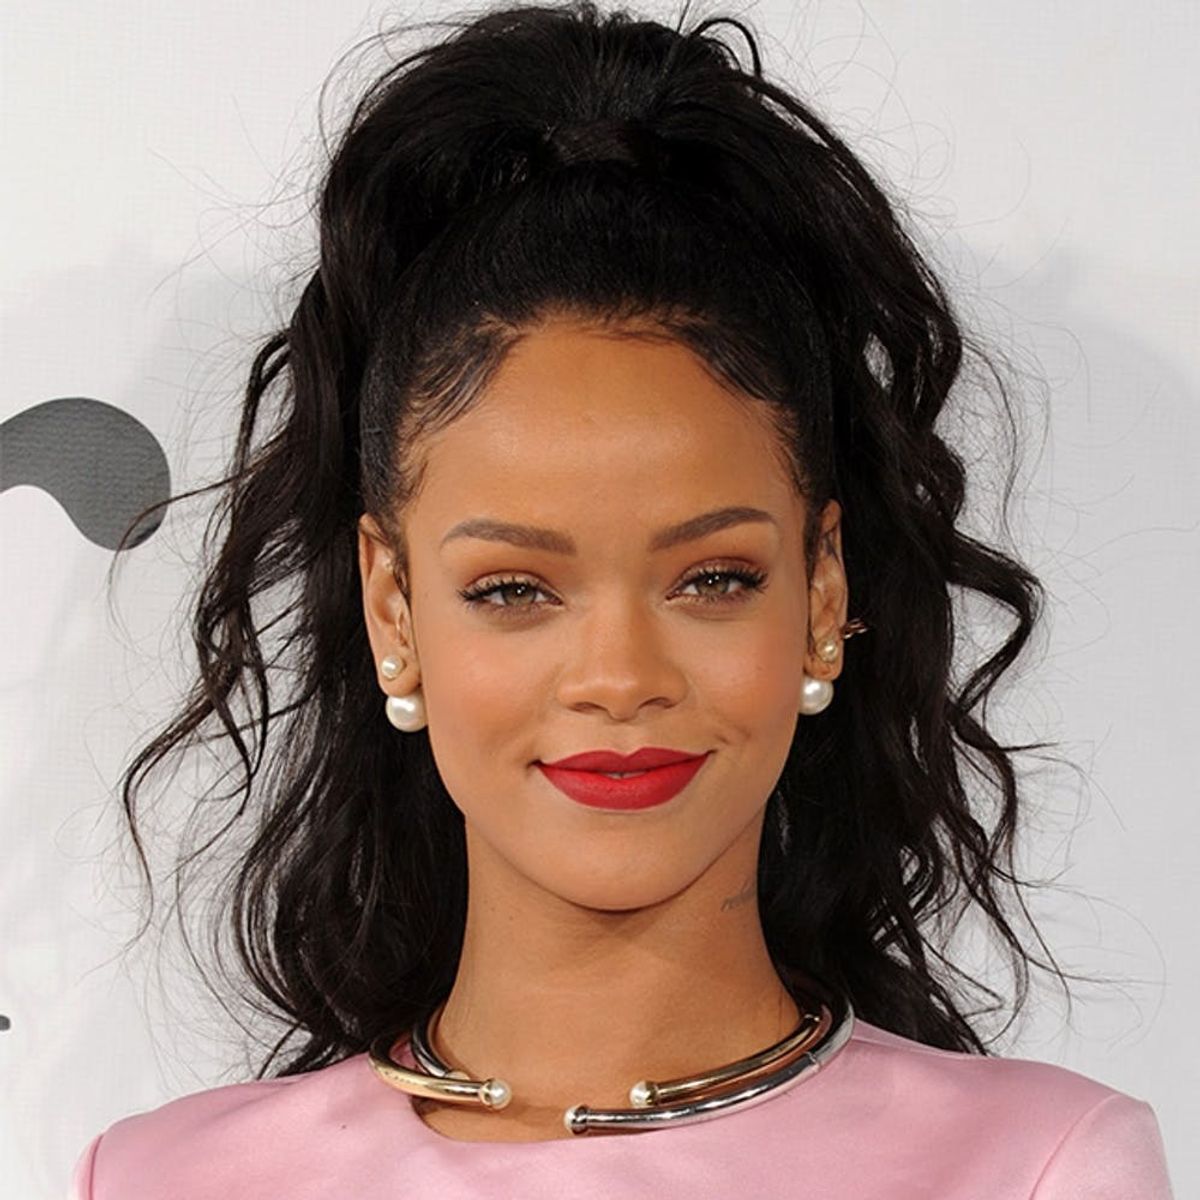 This Is What Rihanna’s New Fragrance Will Smell Like